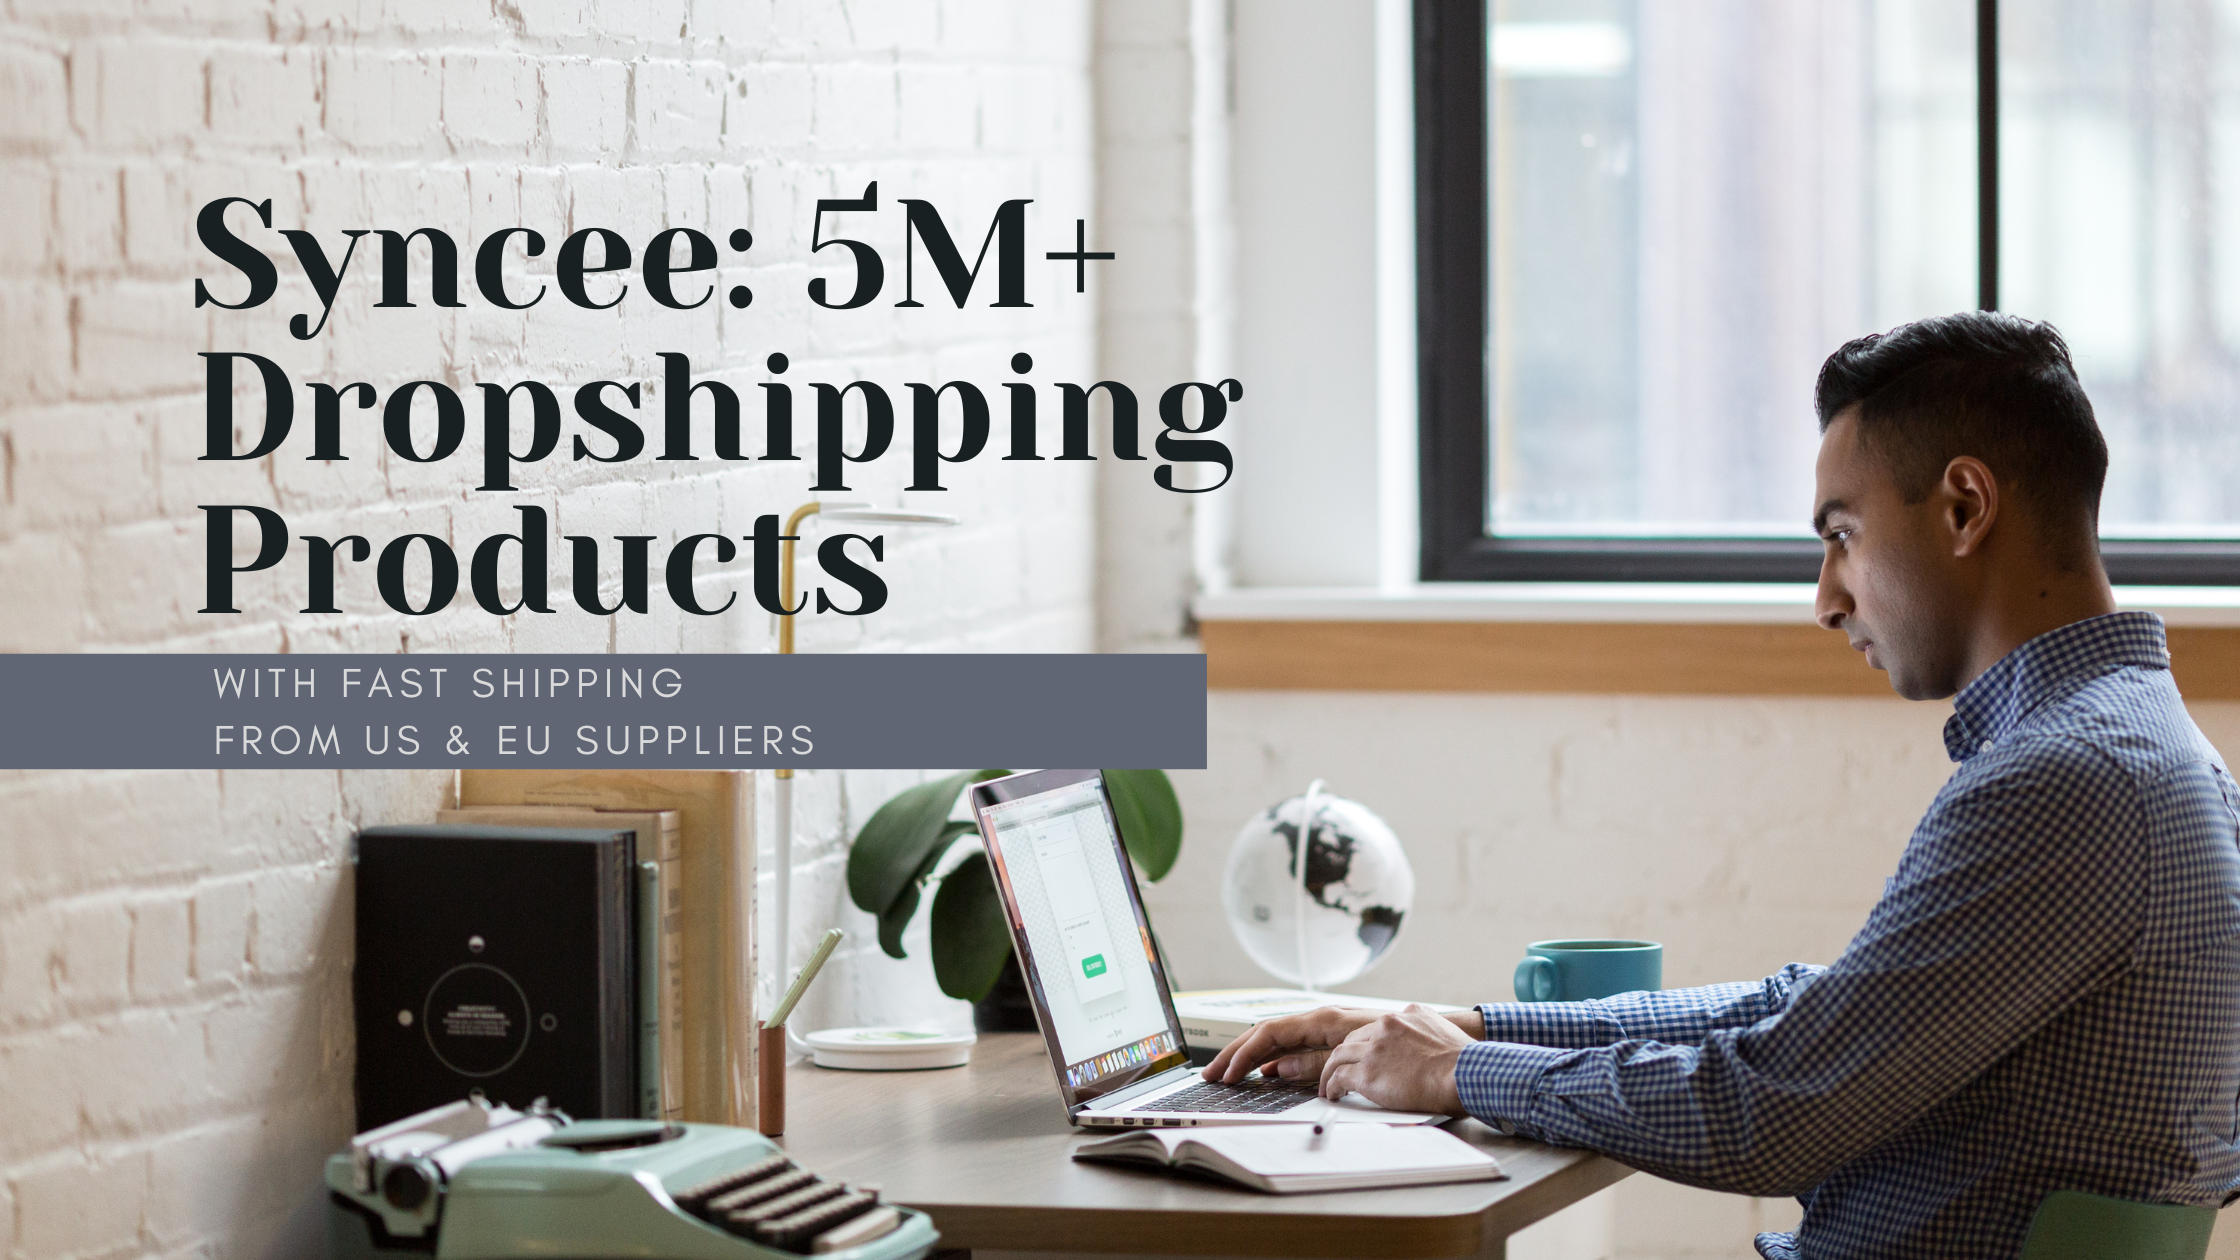 Syncee: 5M+ dropshipping products with fast shipping from US and EU suppliers